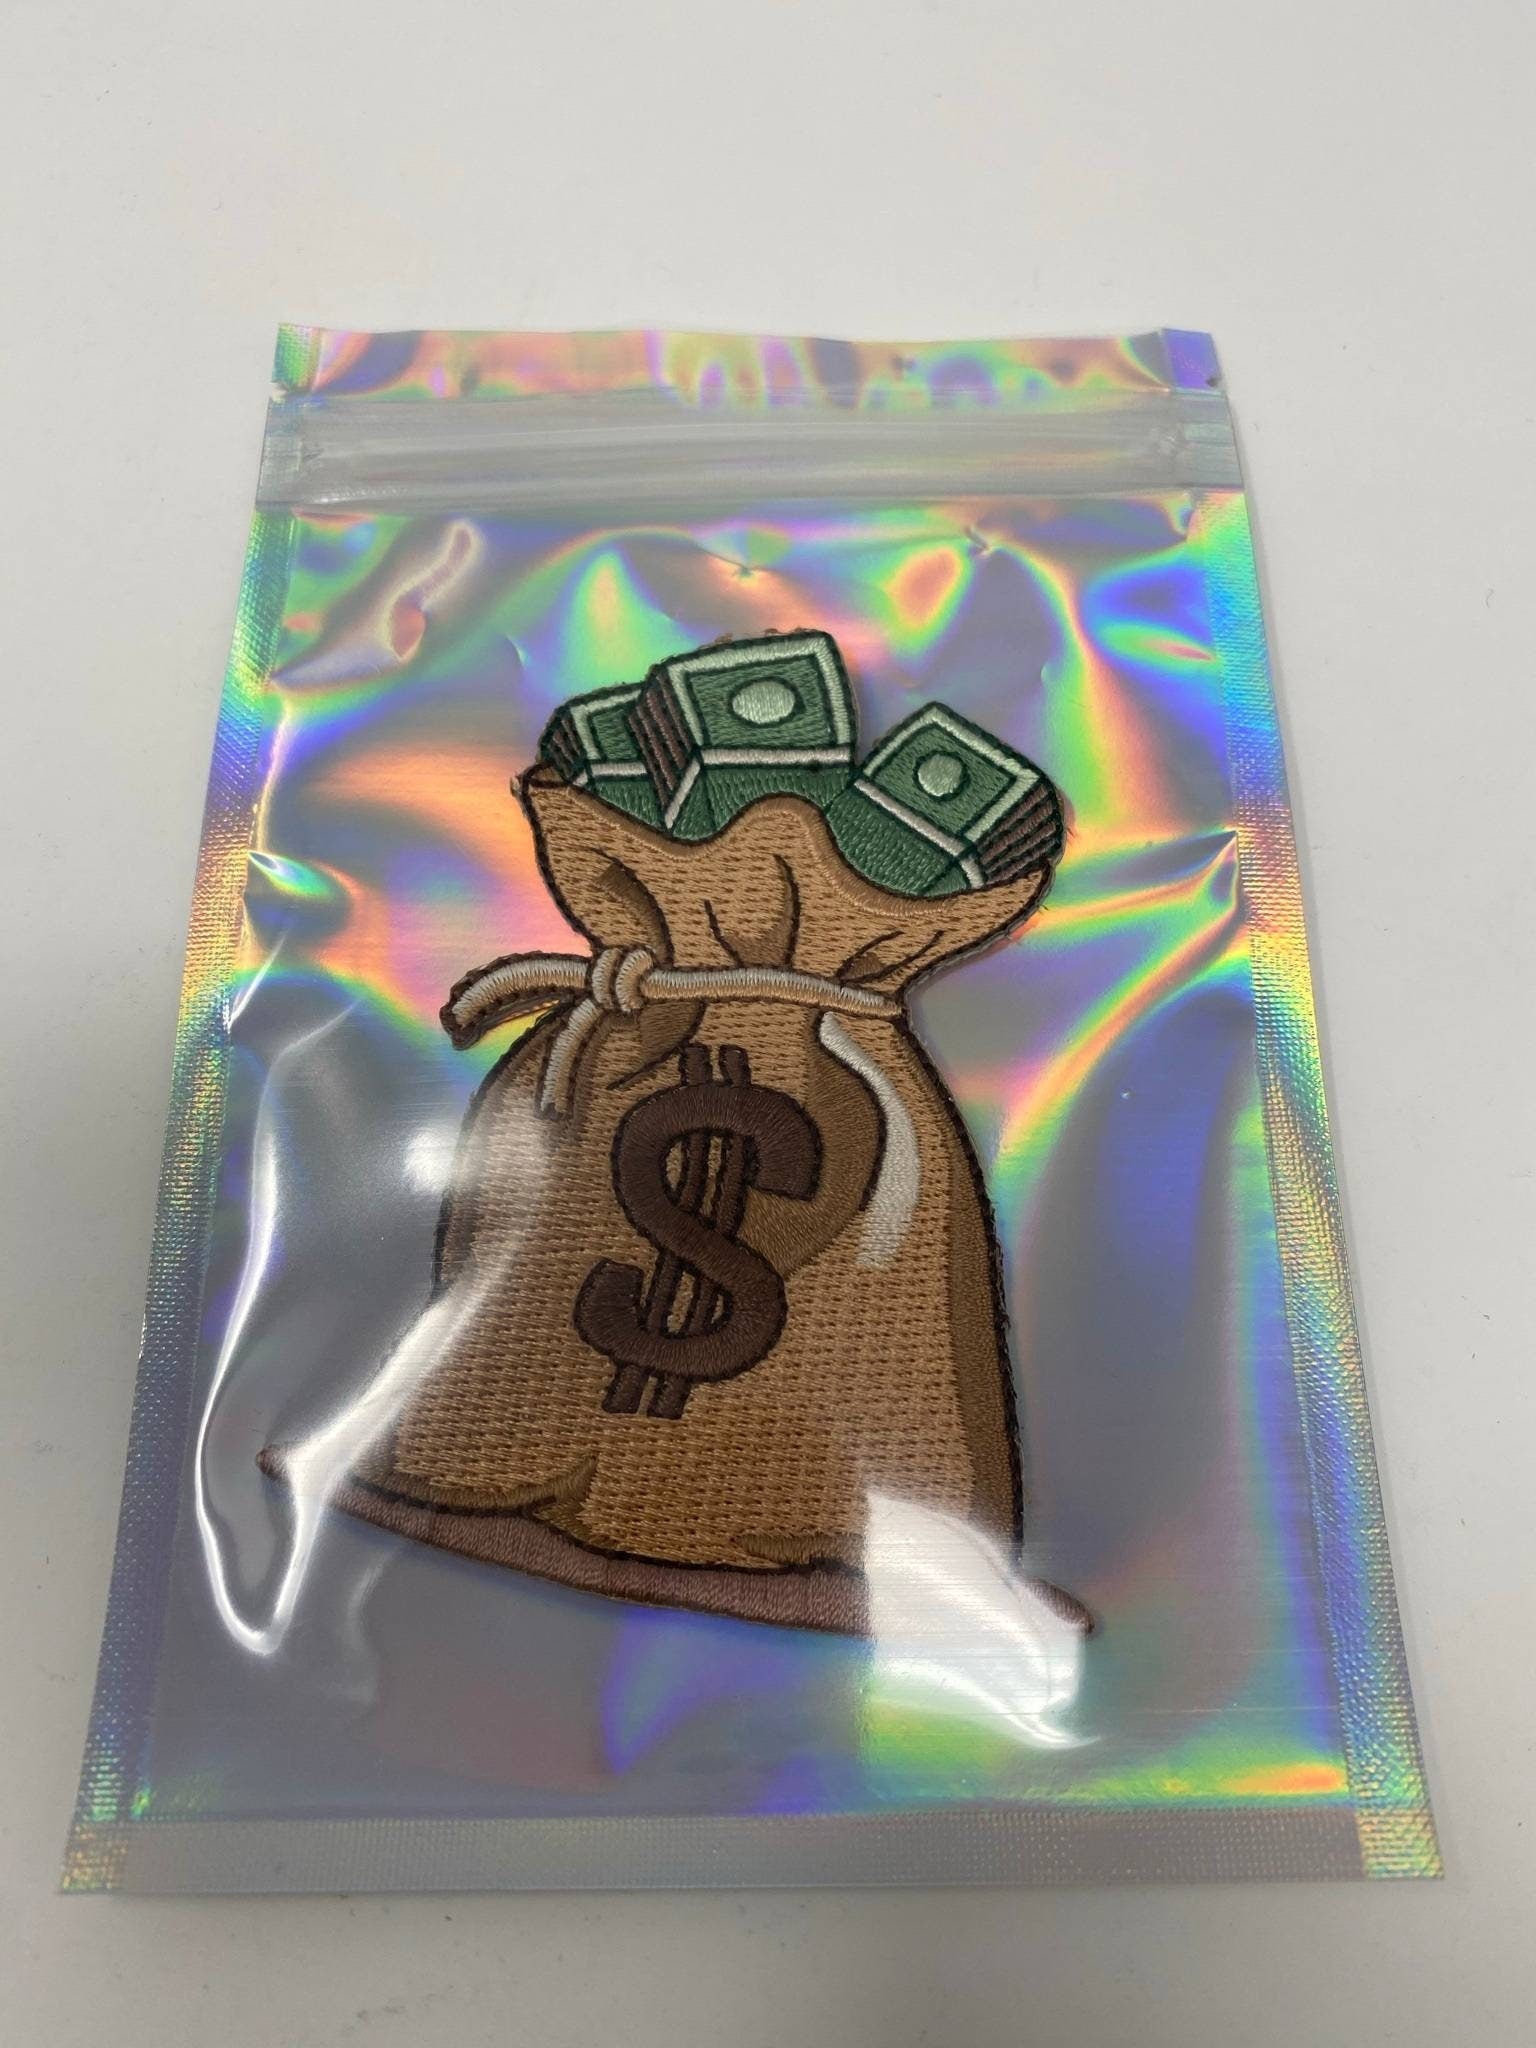 Bags: 100 pc, Smell Proof Holographic Bags for Food or Product; Size 4x6", Resealable Bags, Weed Bags, Product Bags, Cookie Bags, Laser Bags